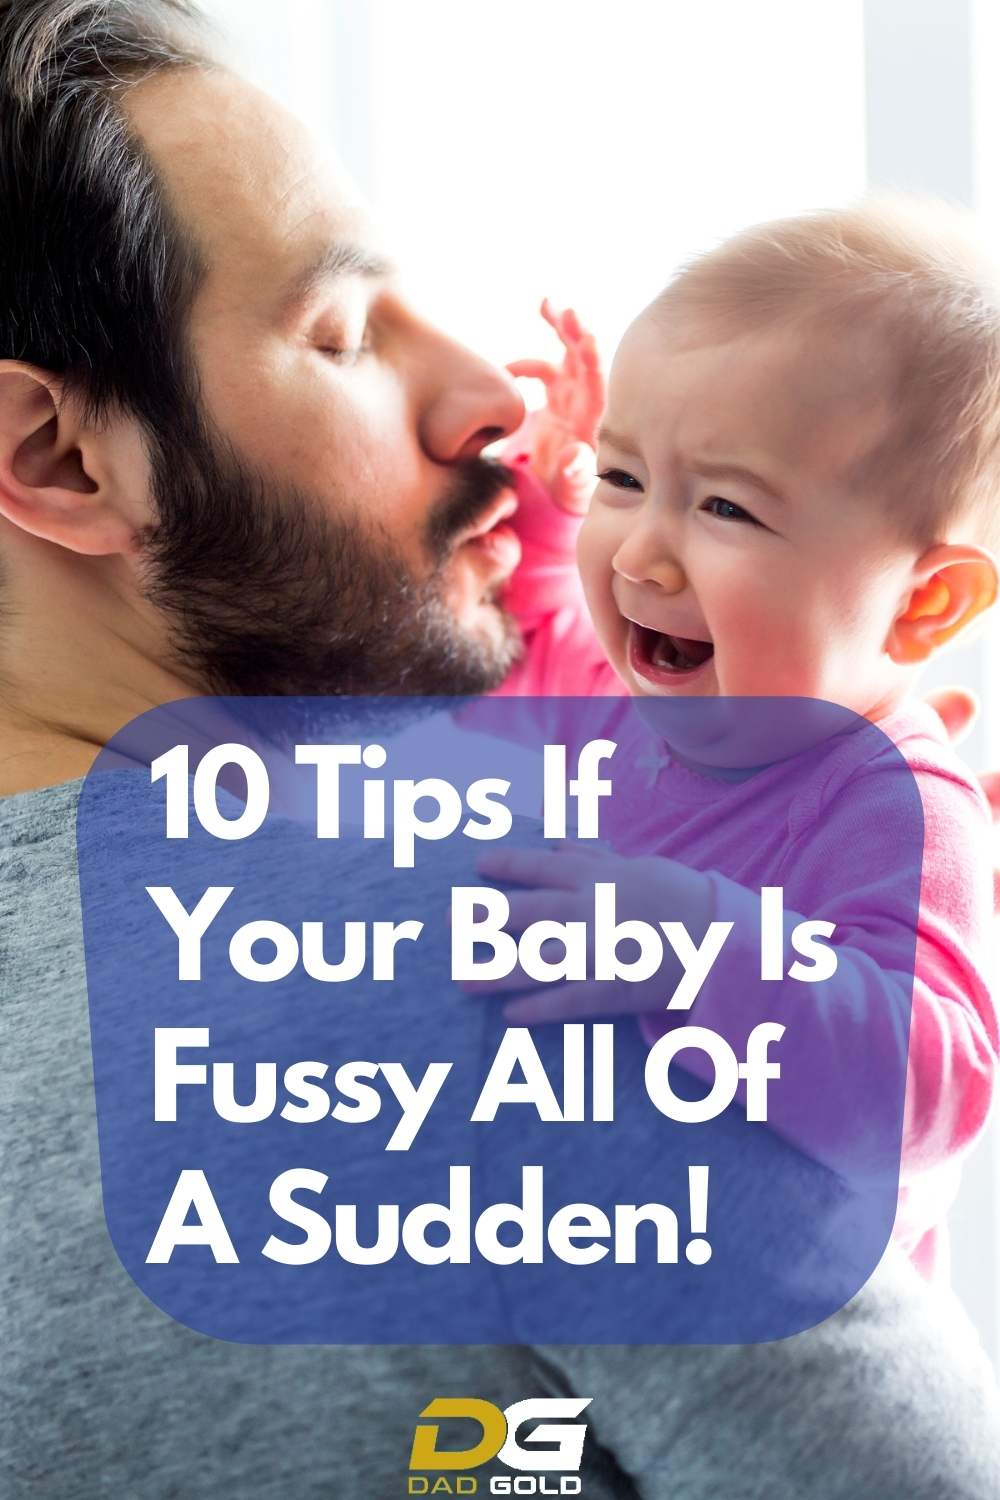 10 Tips If Your Baby Is Fussy All Of A Sudden!